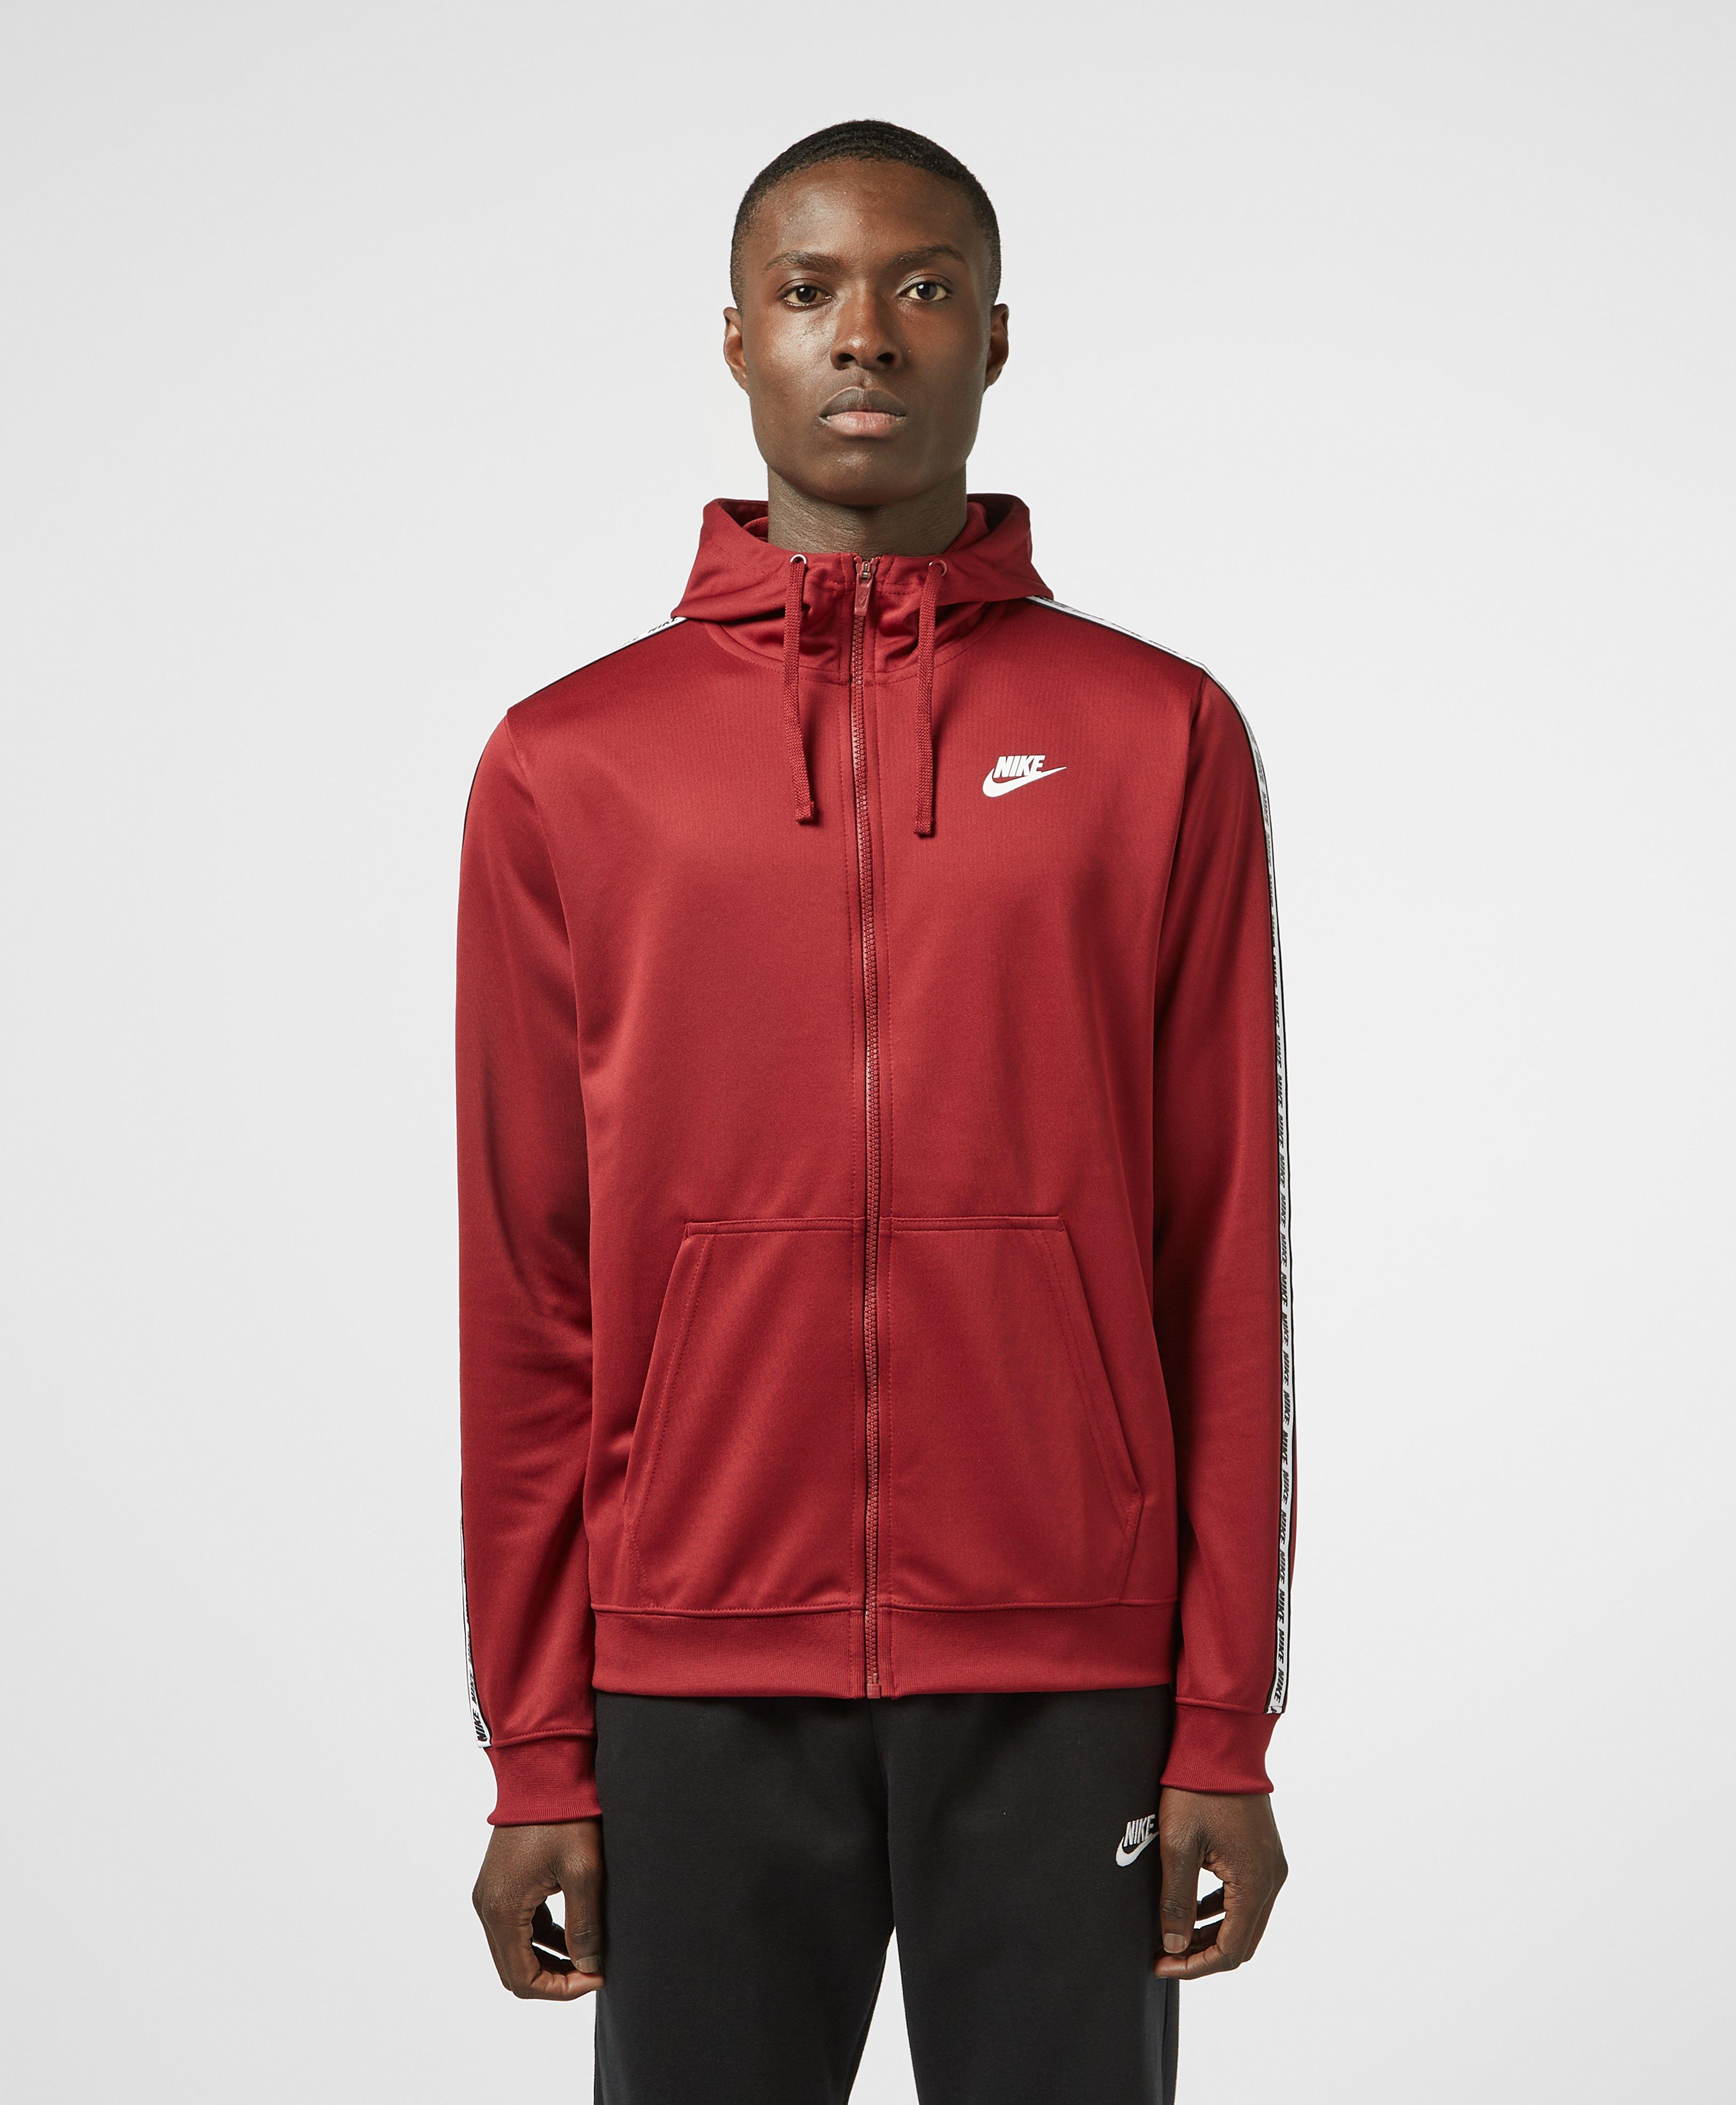 nike repeat hoodie red outlet 598f9 7662a